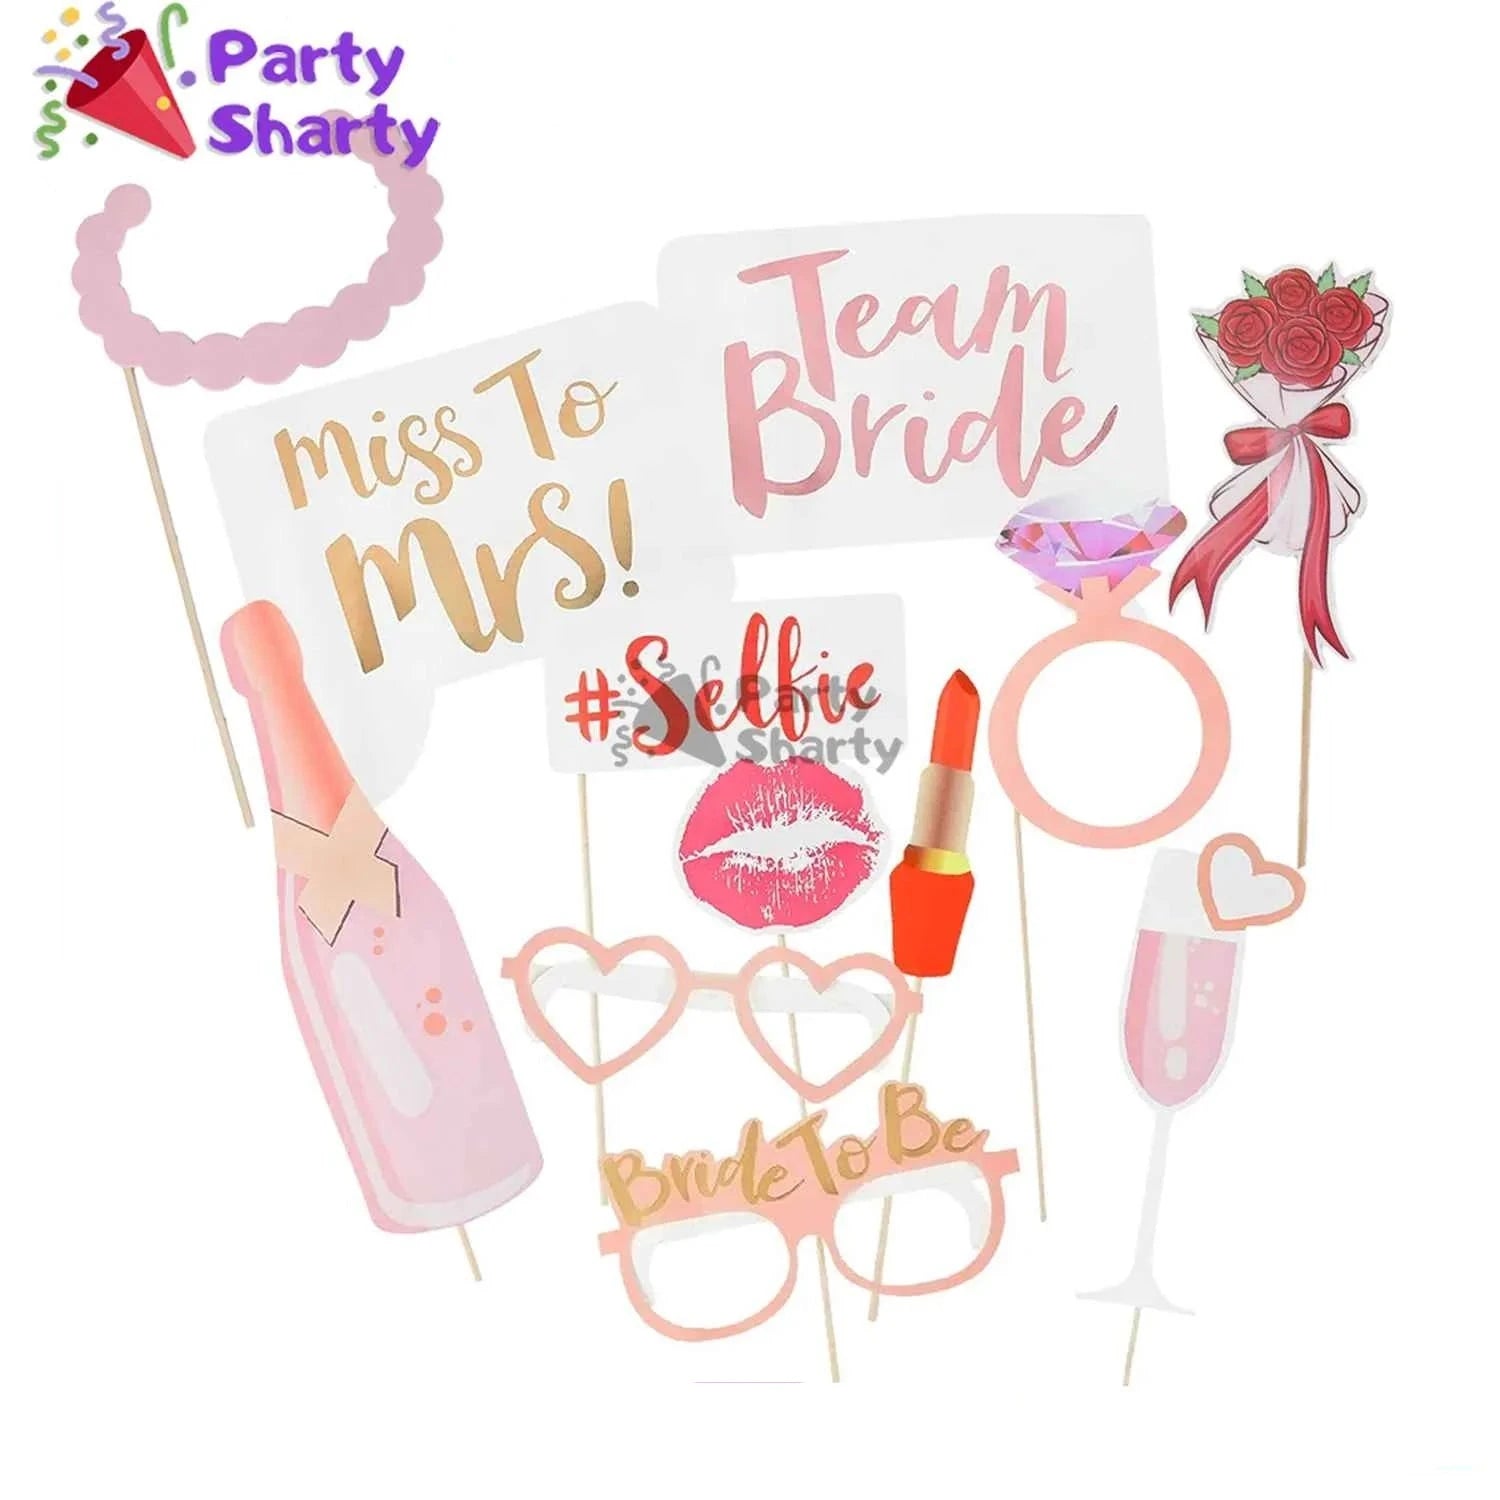 12 Pcs Bride To Be Props, Bridal Shower Photo Booth Props, Wedding Party Celebration Props, Bride to Be Props for Bachelorette Party